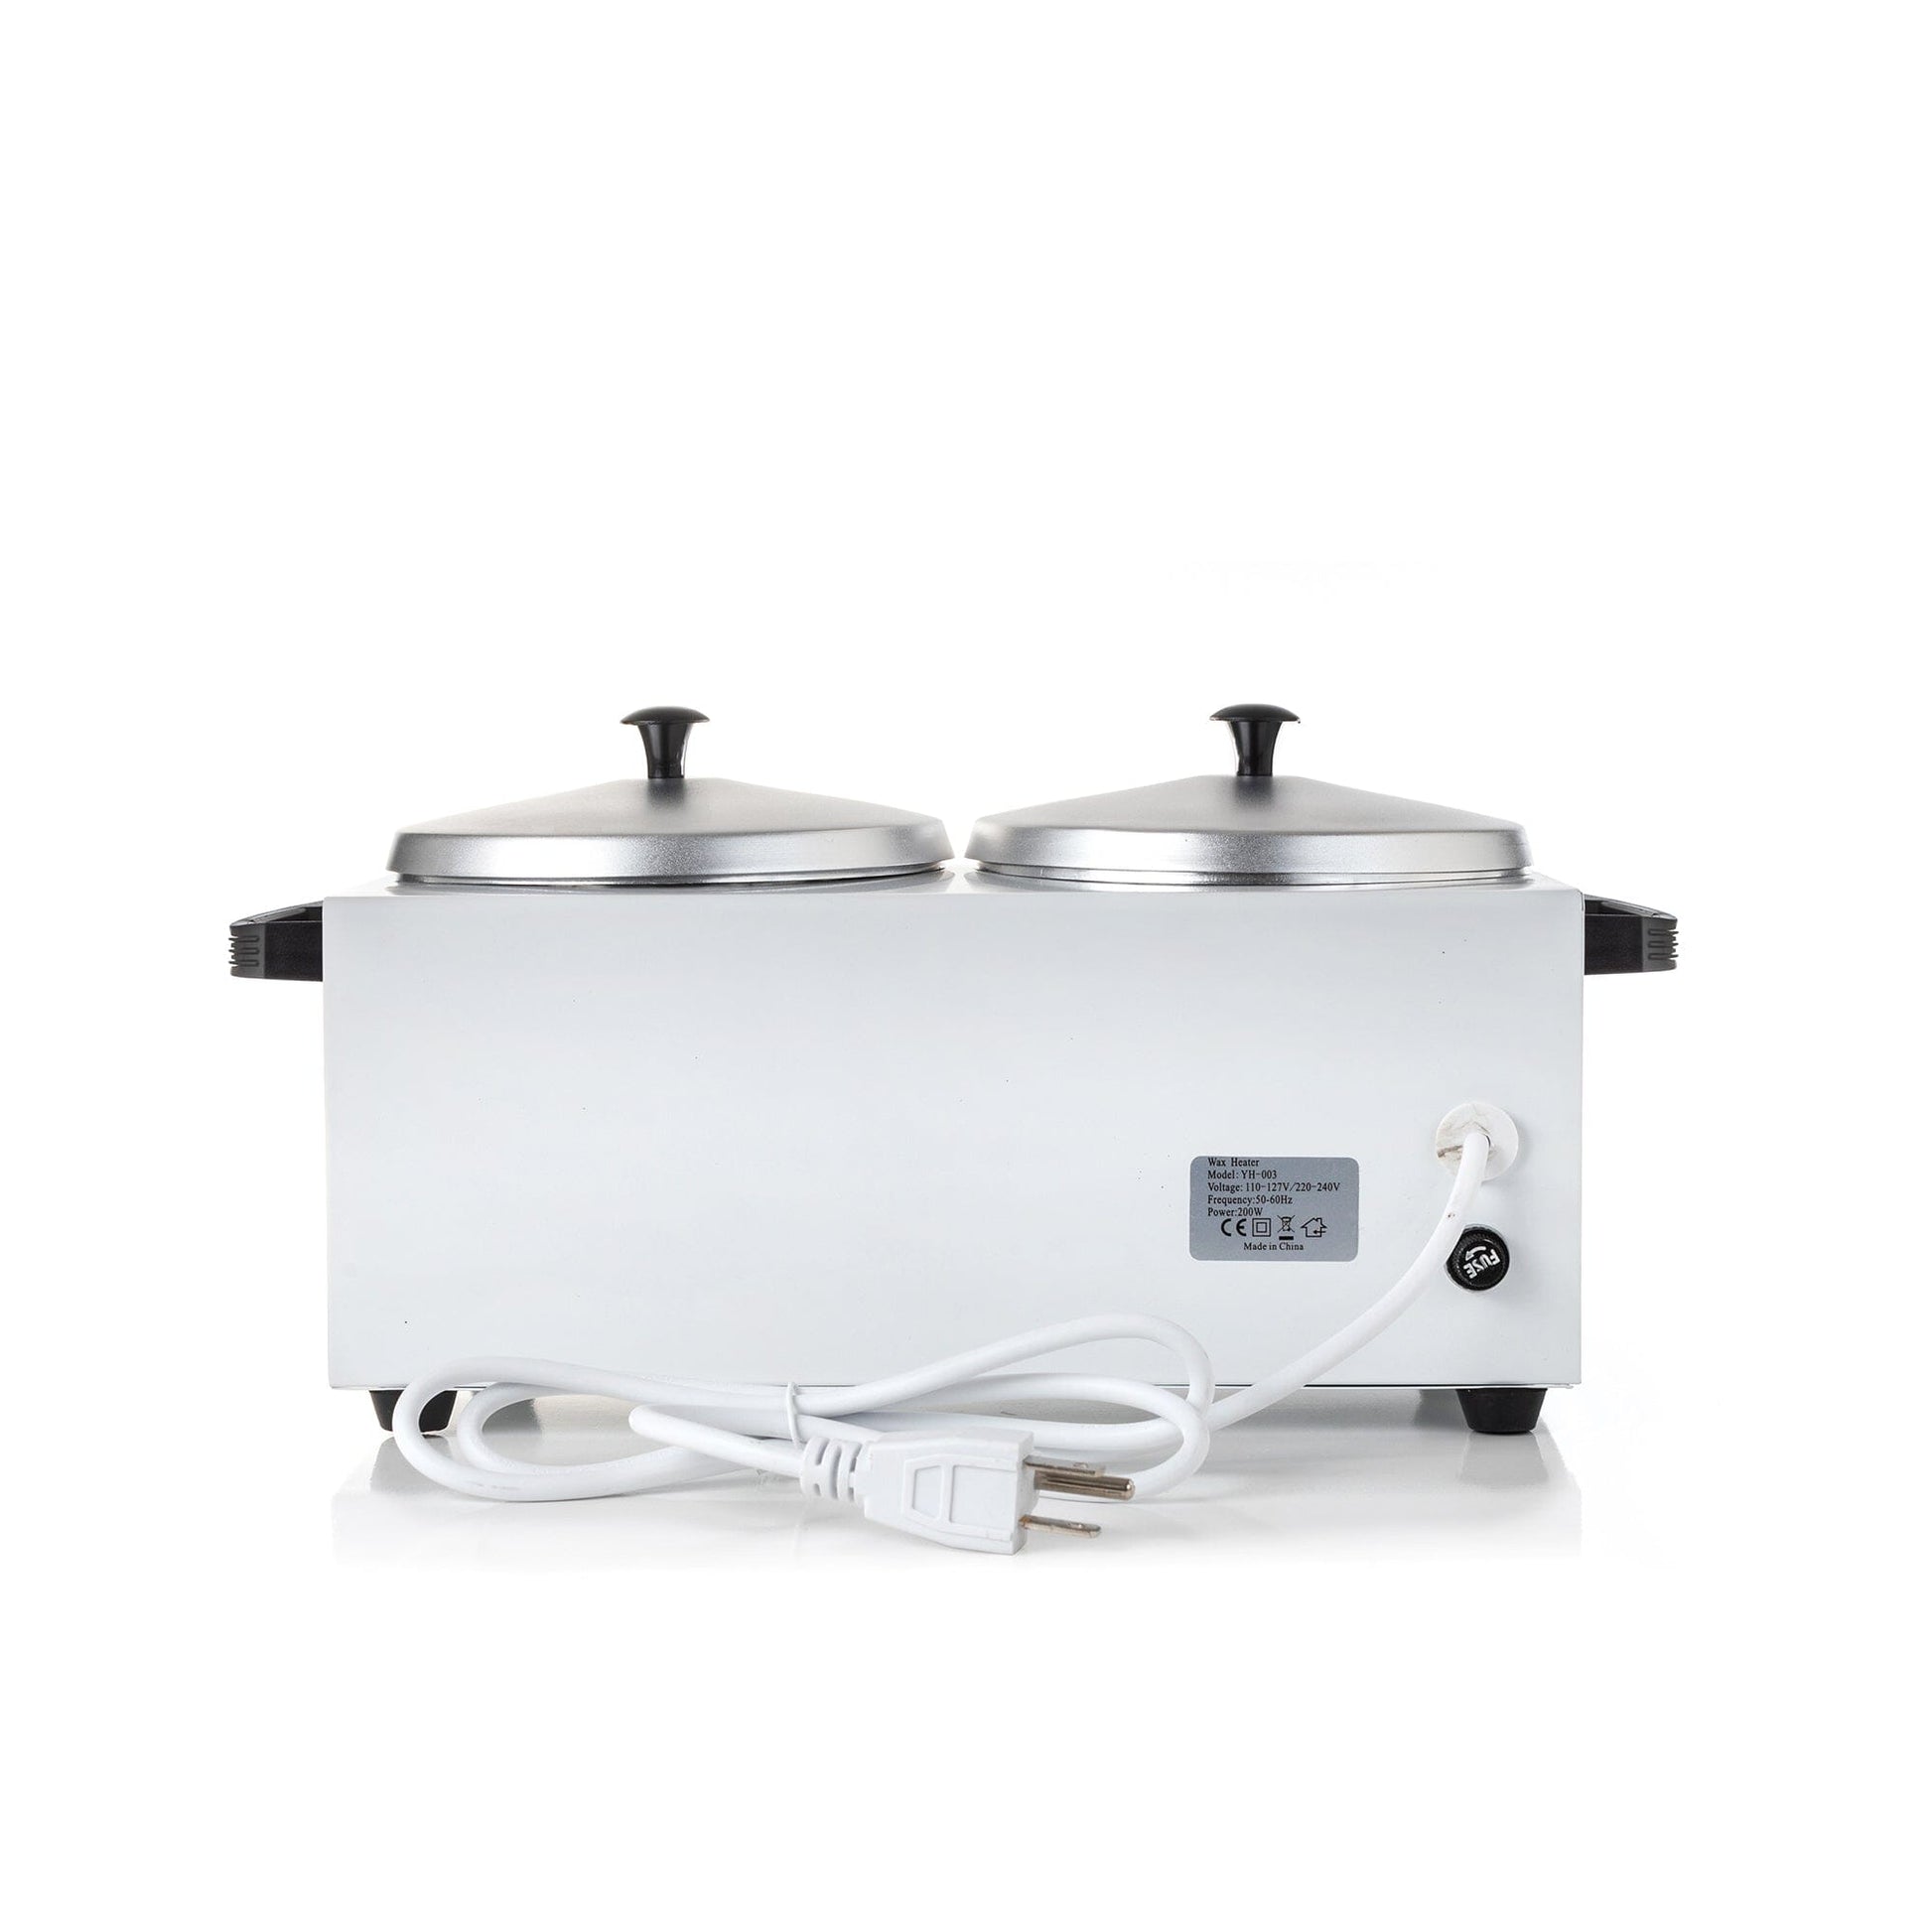 Professional Wax Warmer Designed for Estheticians